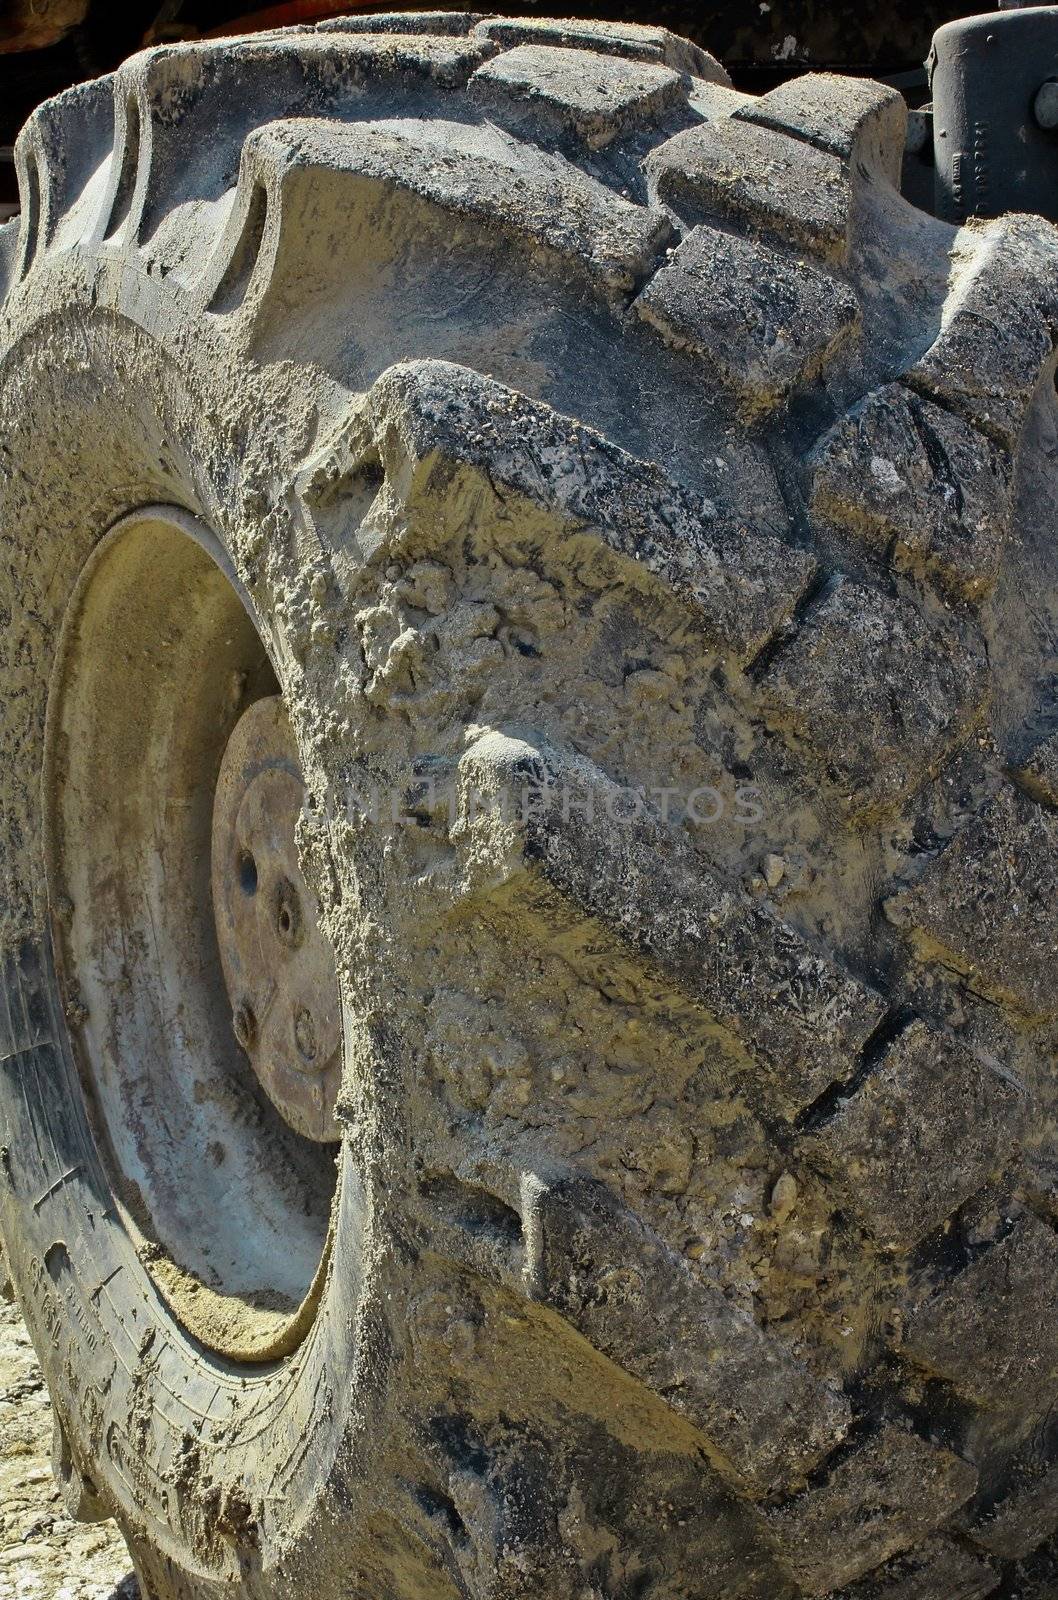 Big heavy tire and wheel on construction area